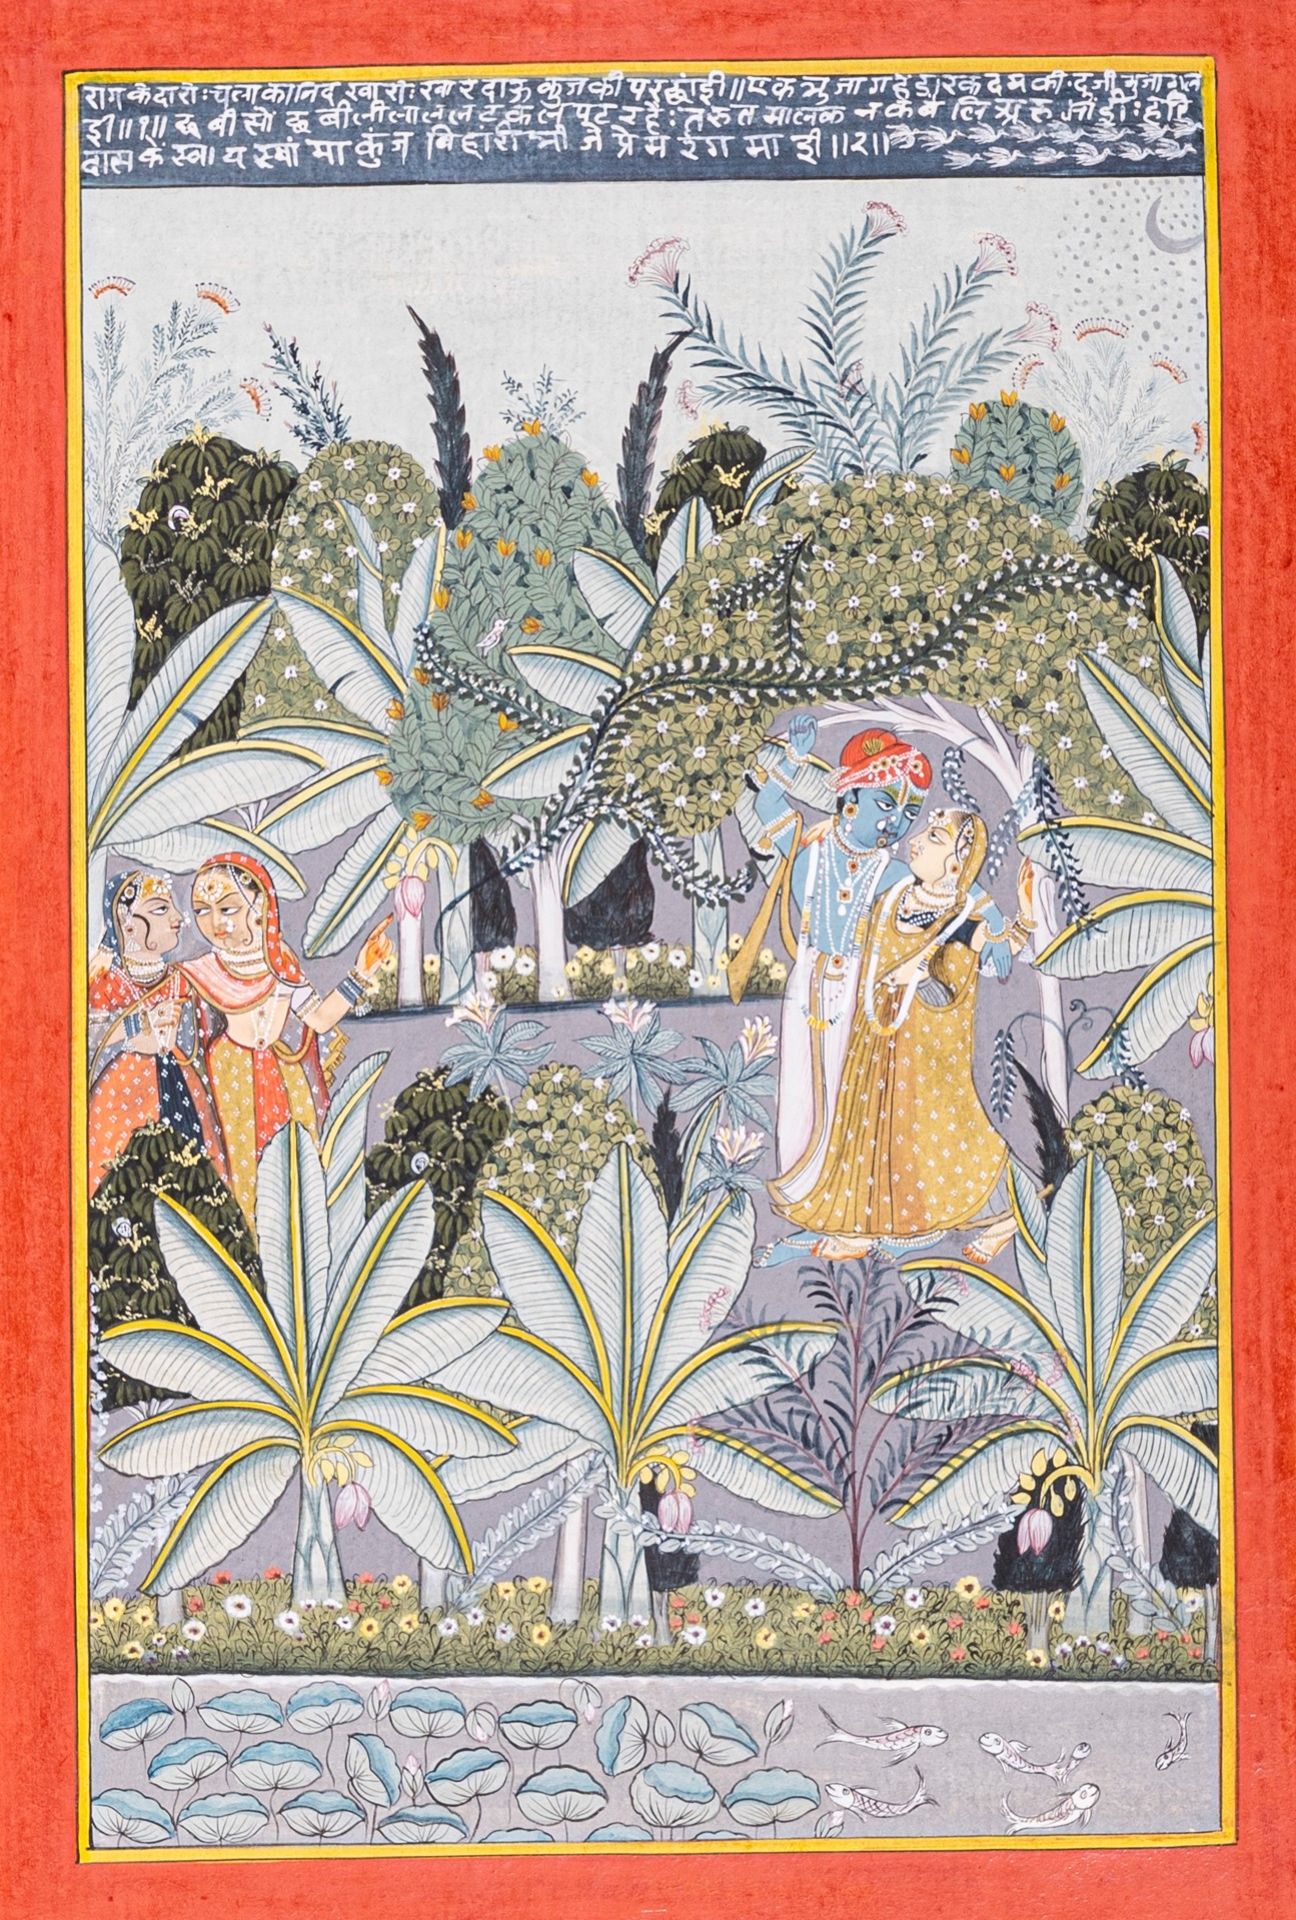 AN INDIAN MINIATURE PAINTING OF KRISHNA AND RADHA, 19th CENTURY